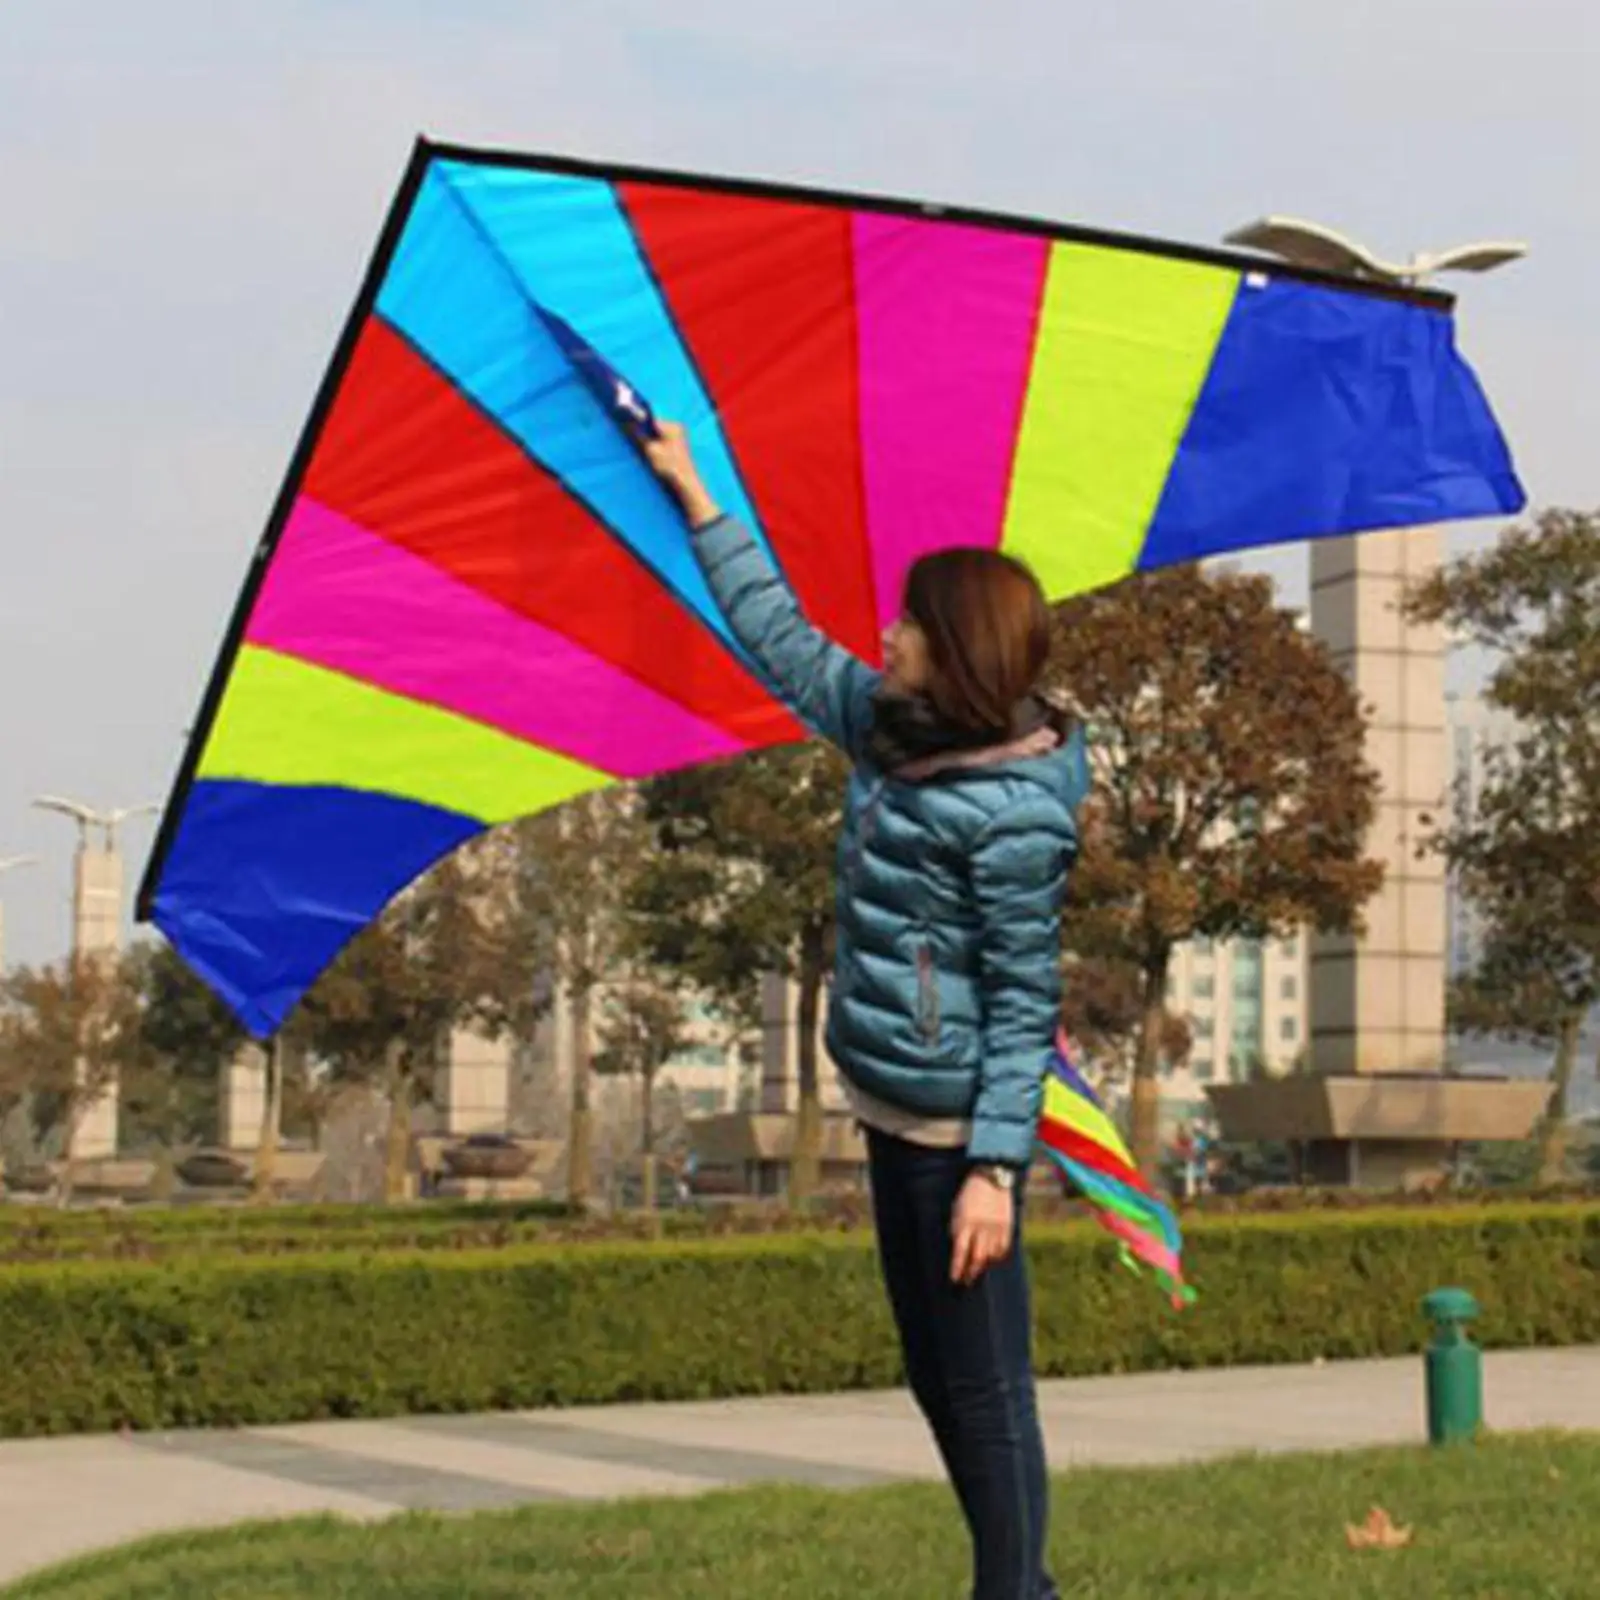 Large Delta Kite Easy with String Windsock Single Line Rainbow for Sports Beach Games Beginner Teenagers